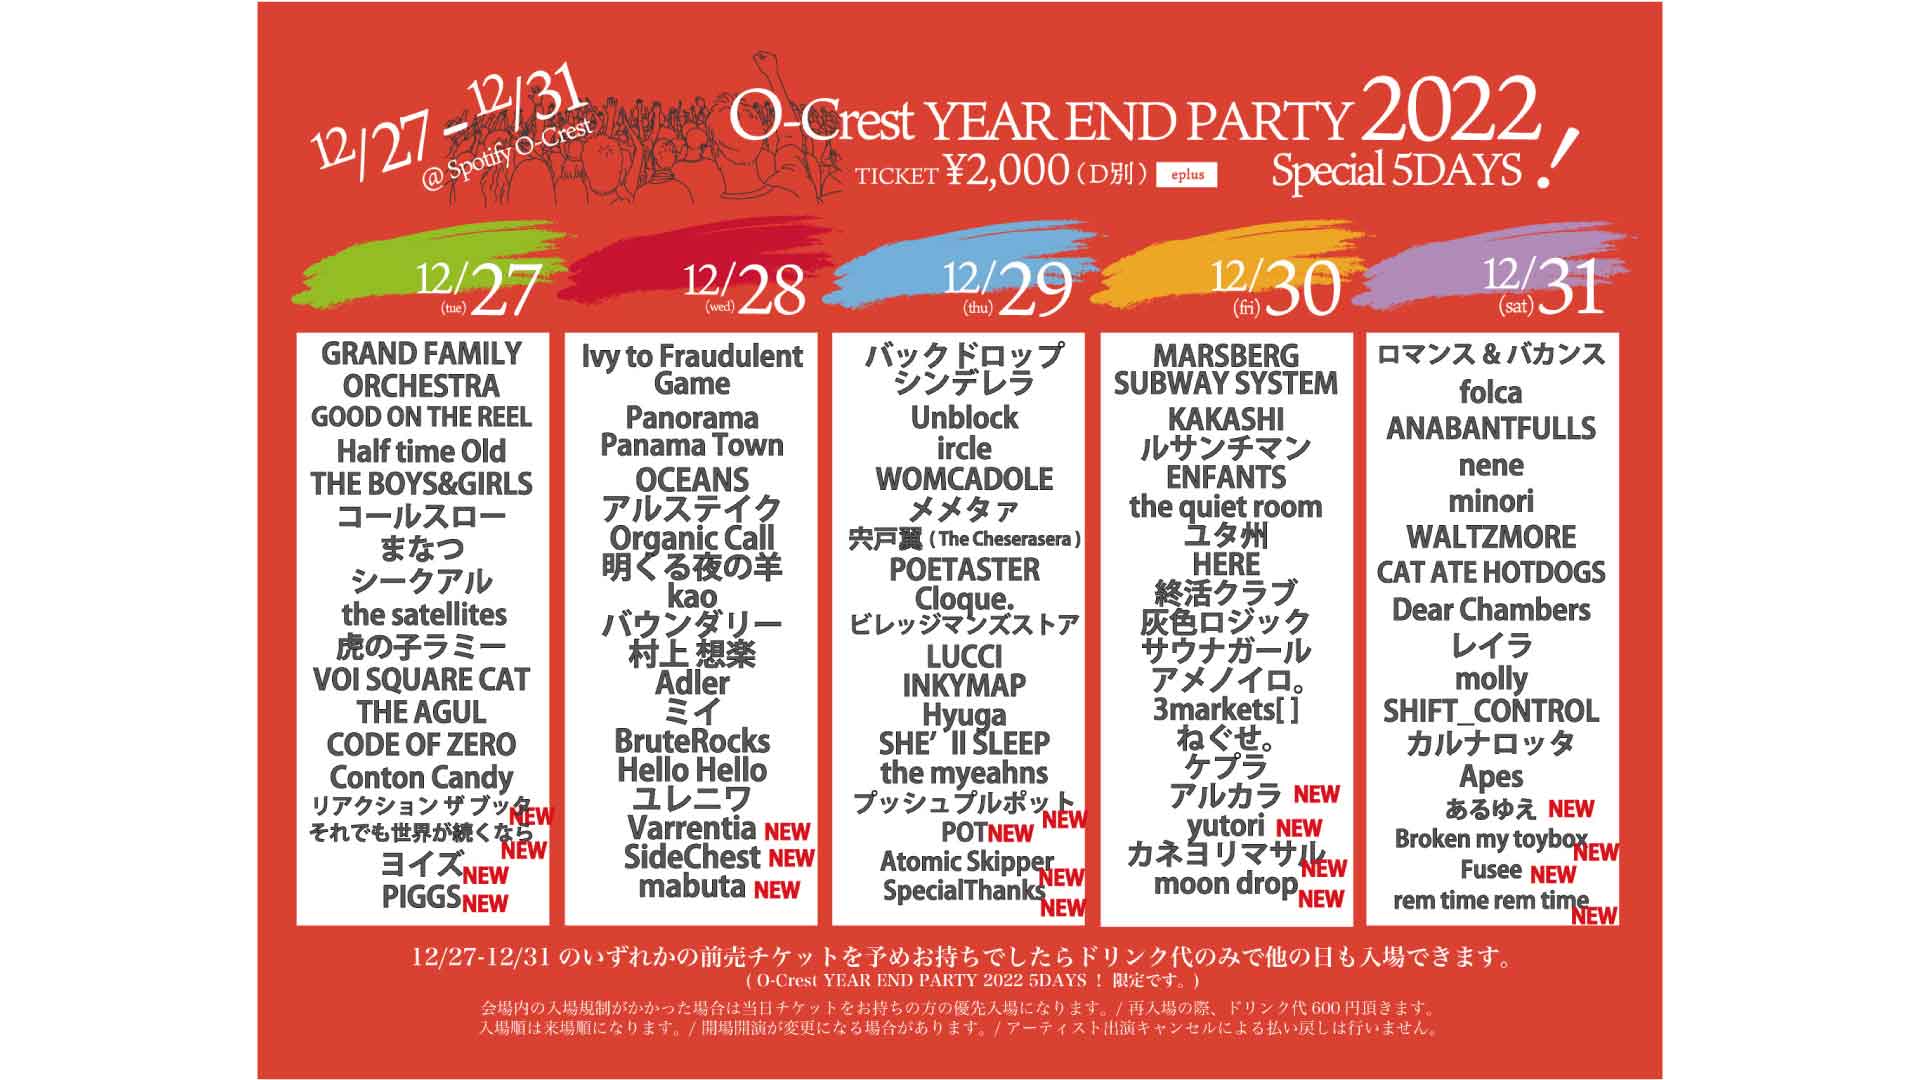 O-Crest YEAR END PARTY 2022 Special 5DAYS！_22/12/28